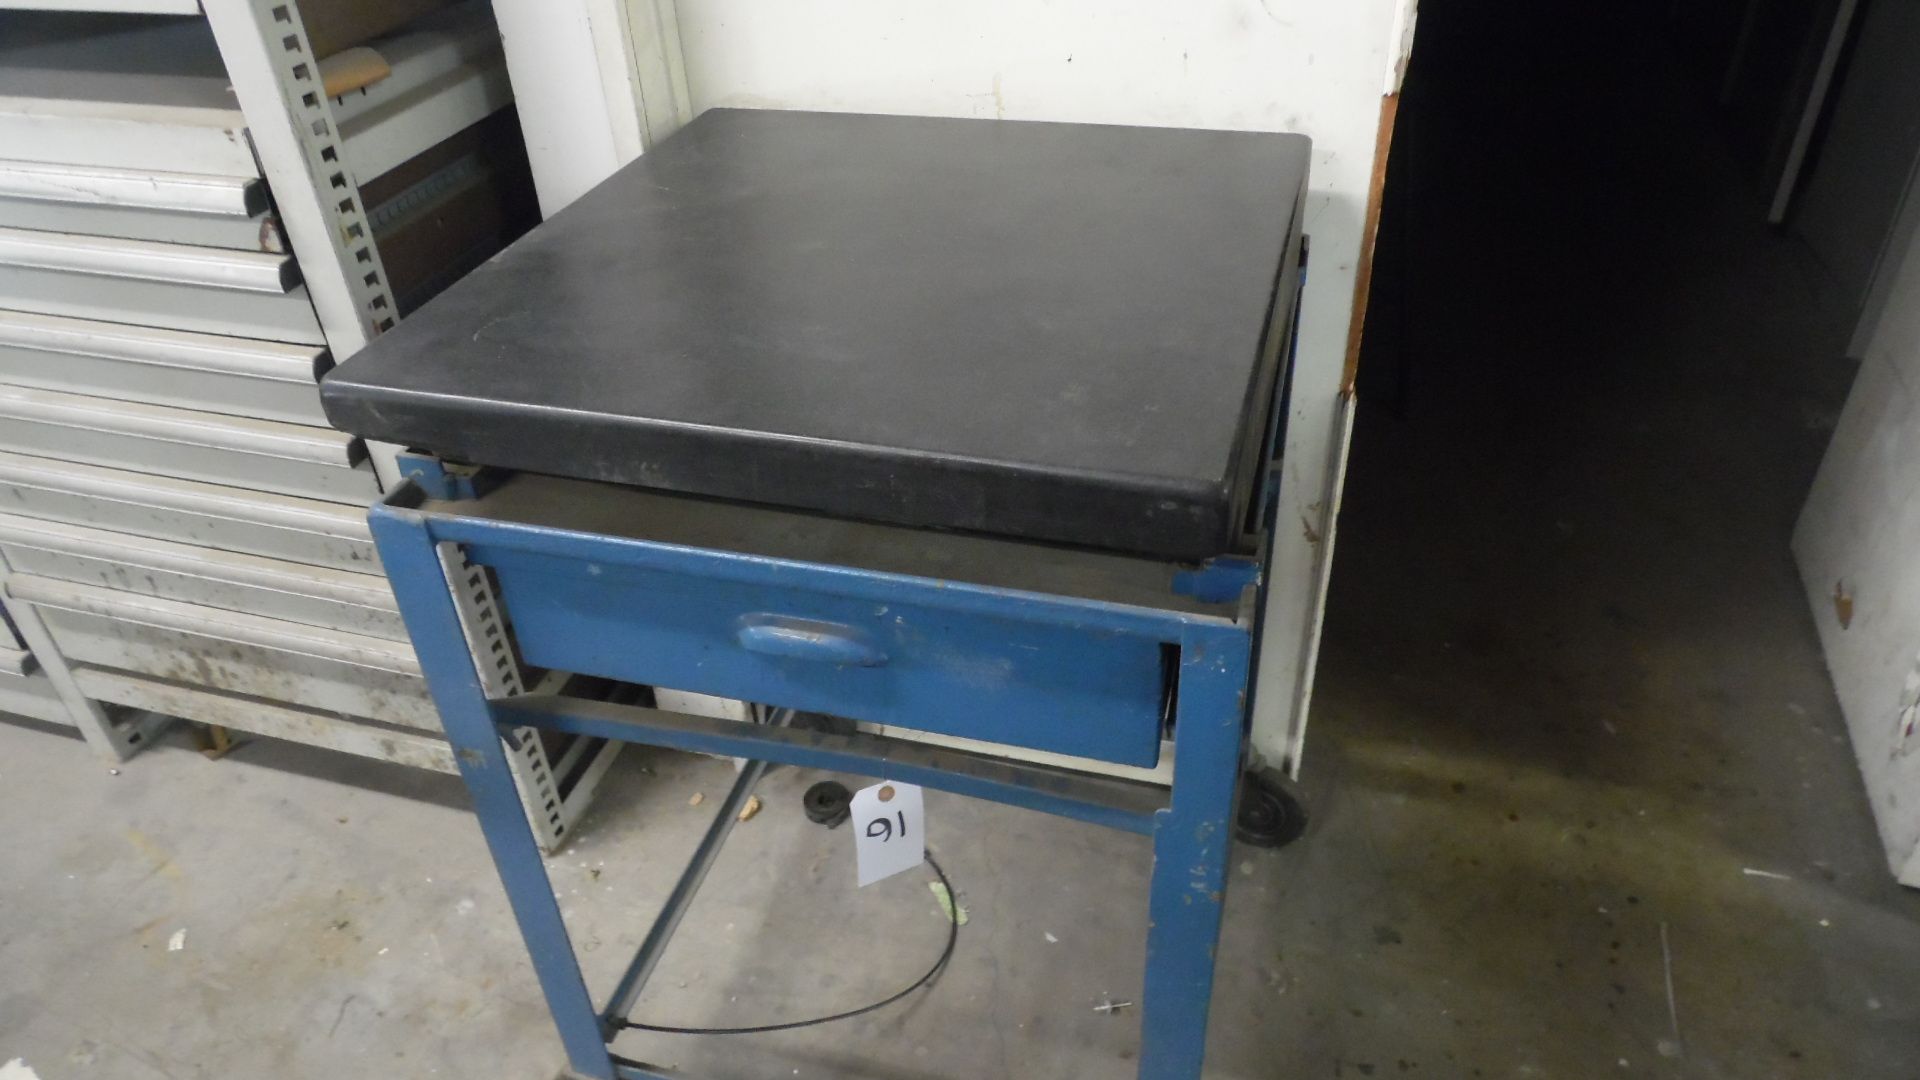 SURFACE PLATE 24" X 24" w/ STAND